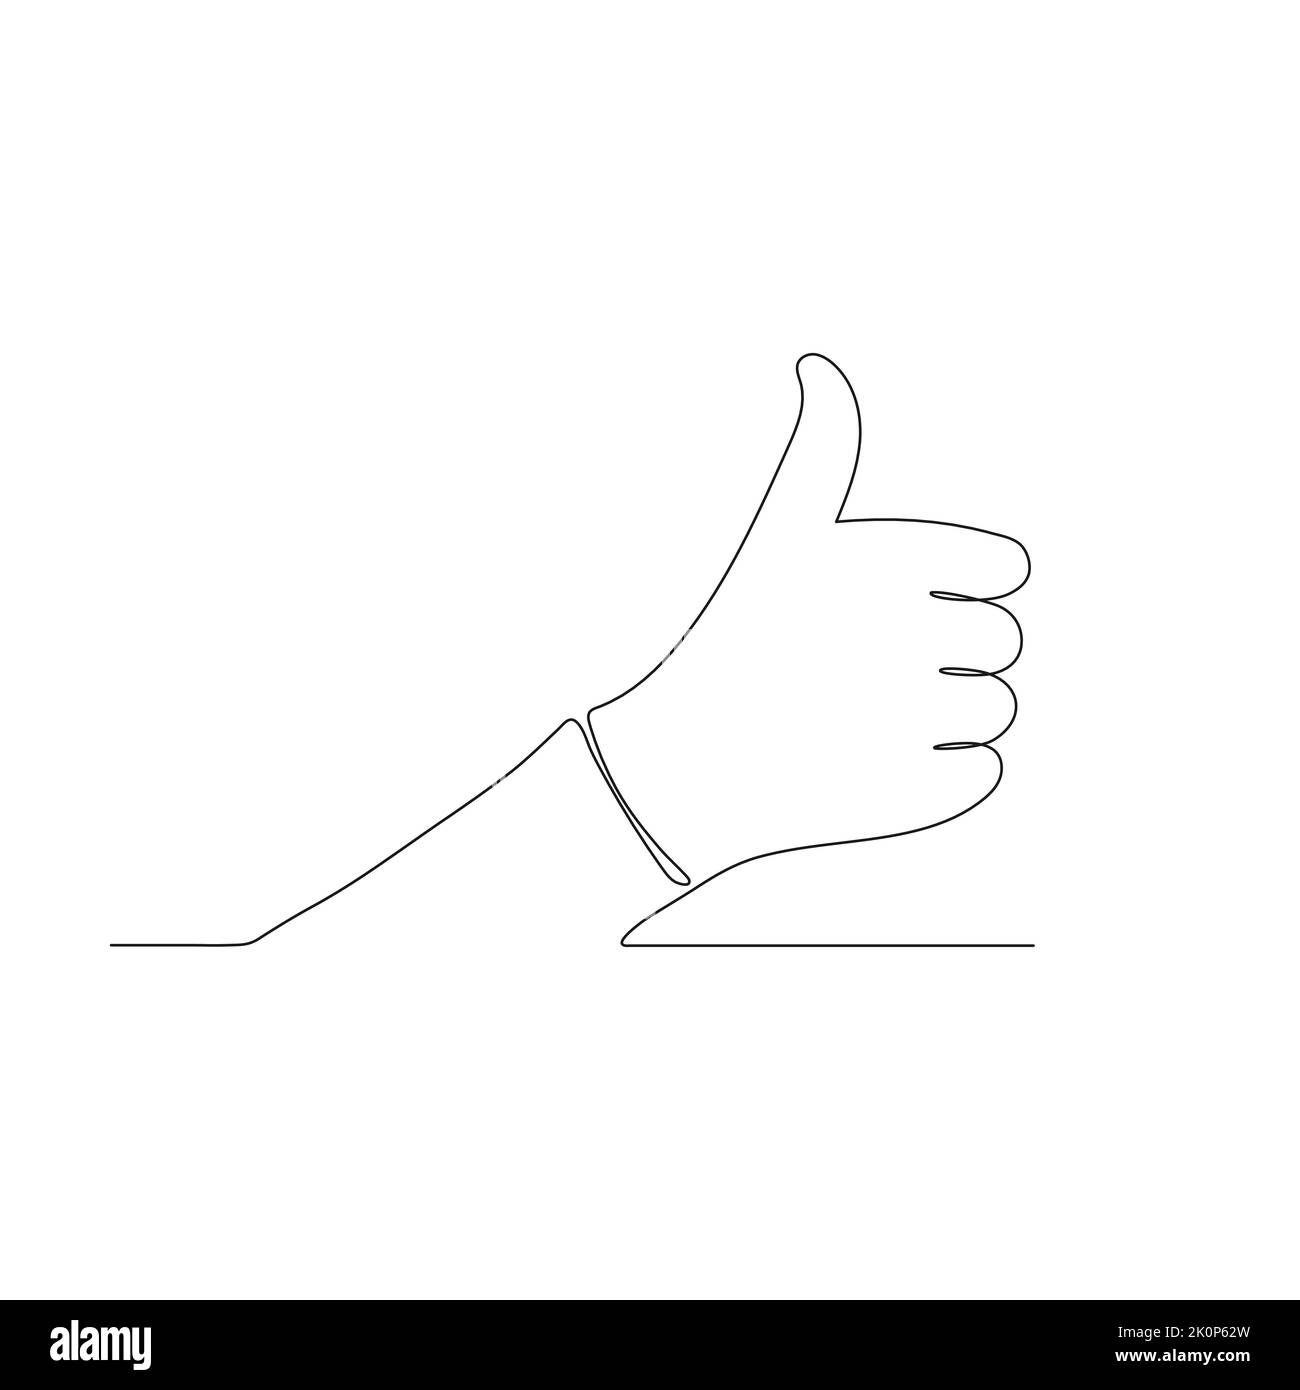 Thumb up hand gesture vector - continuous single line drawing Stock Vector